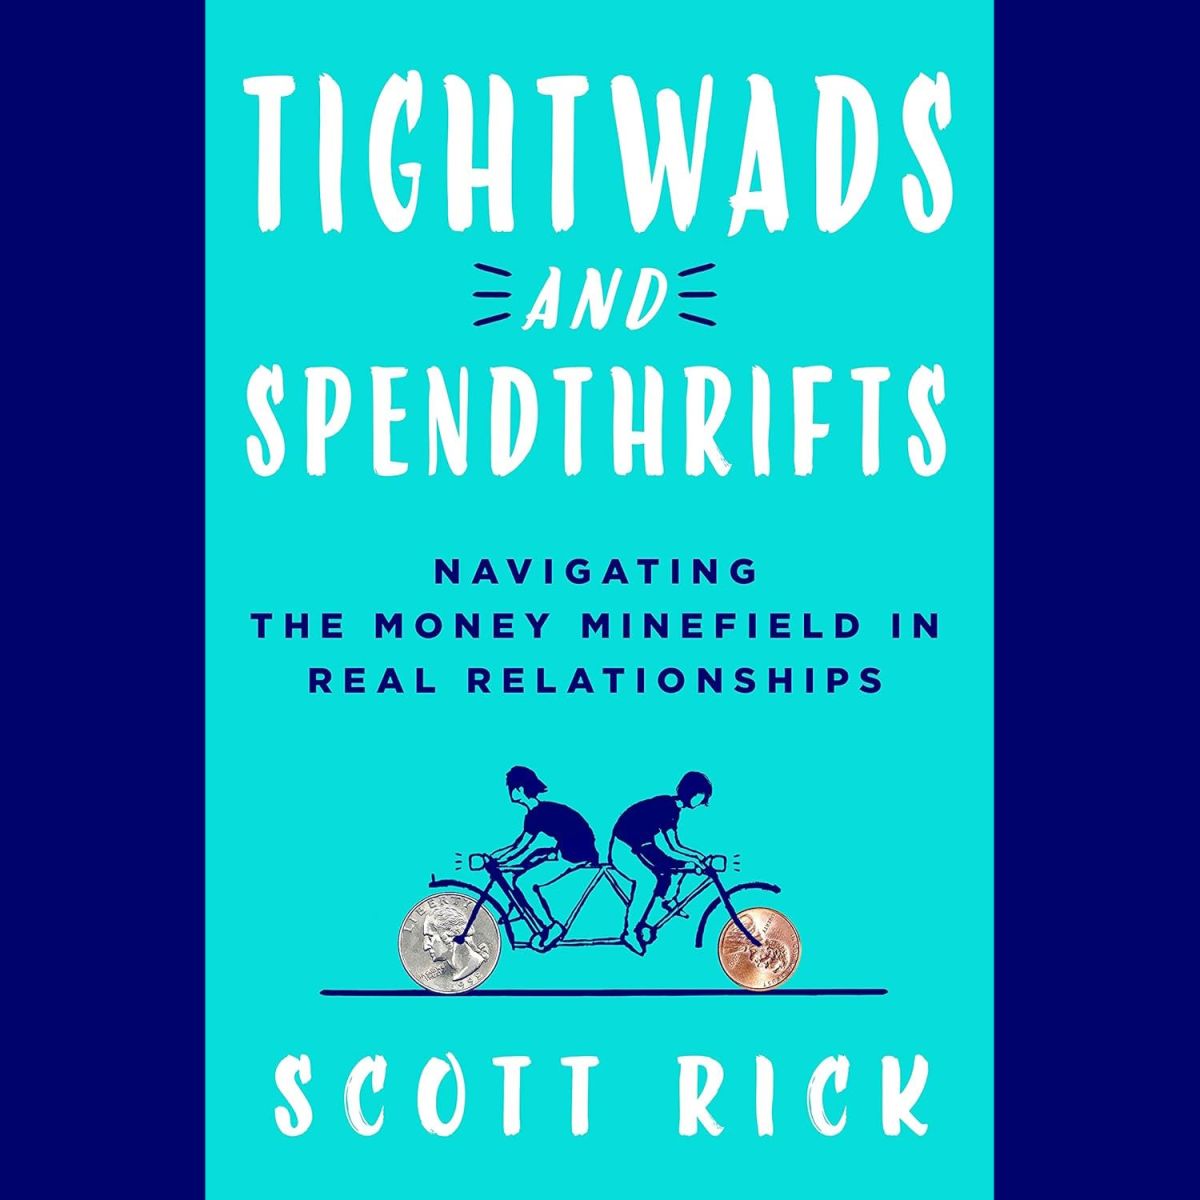 Book Review: Tightwads and Spendthrifts